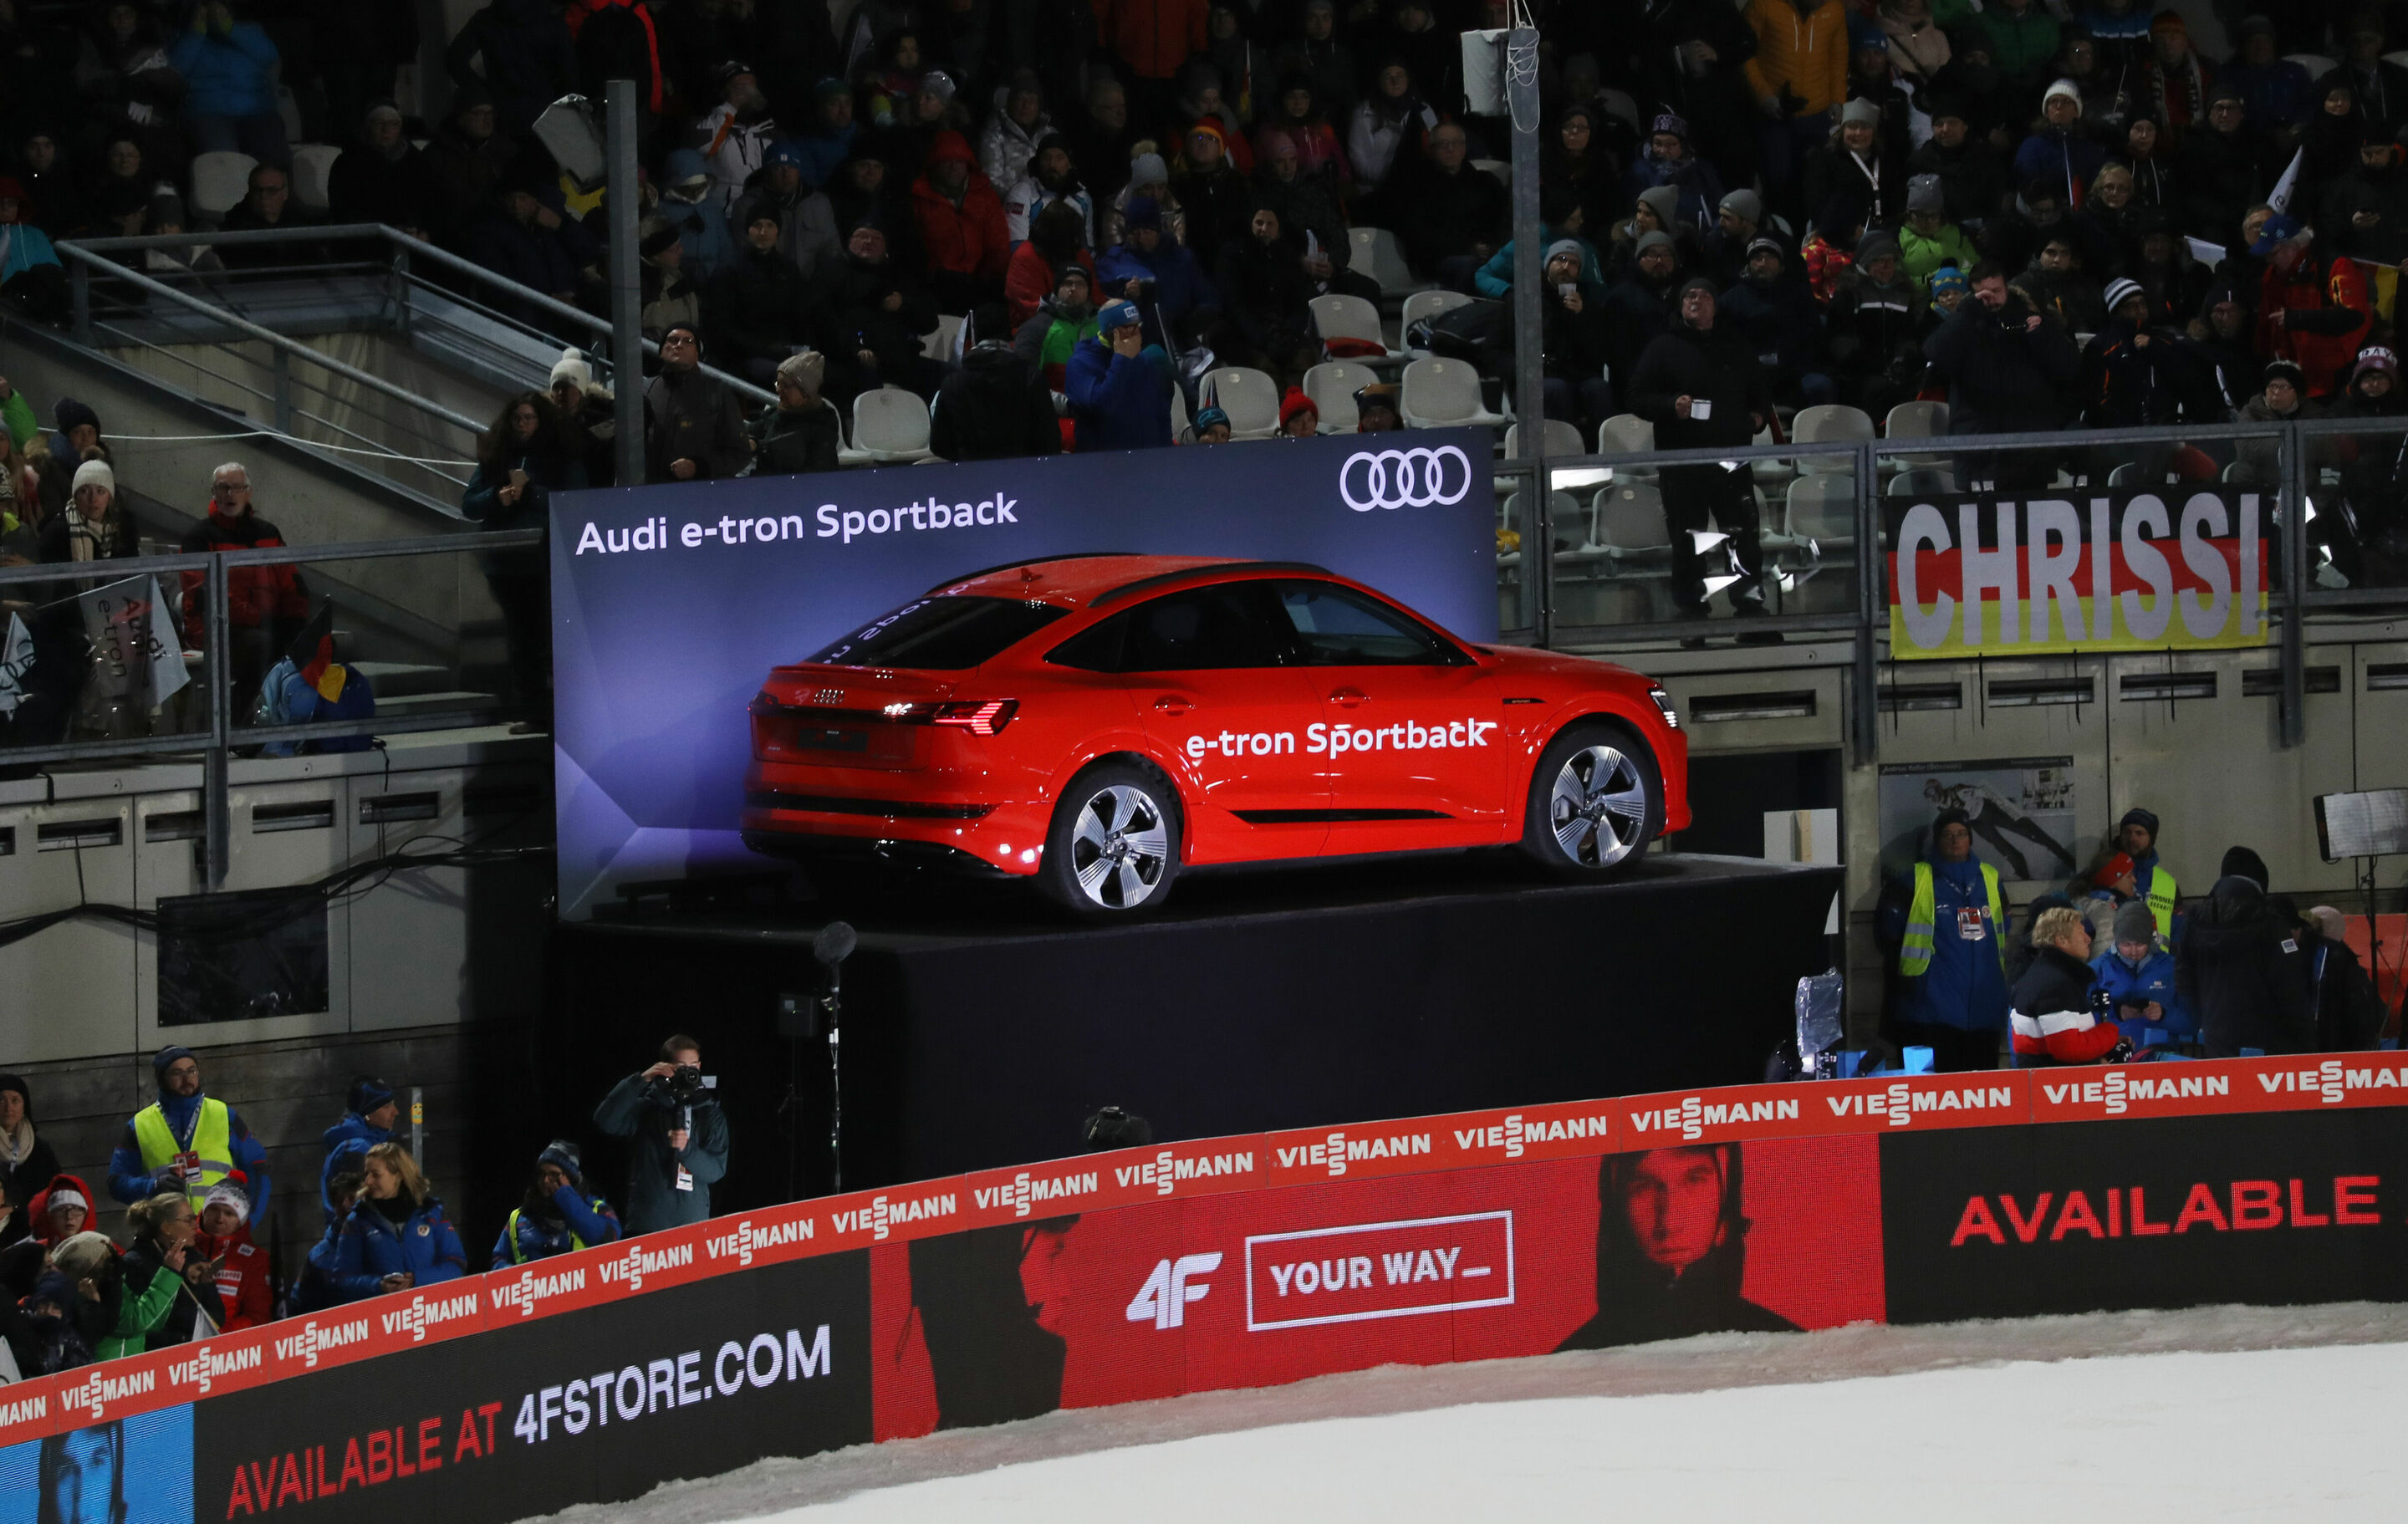 Audi at the 2019/2020 Four Hills Tournament